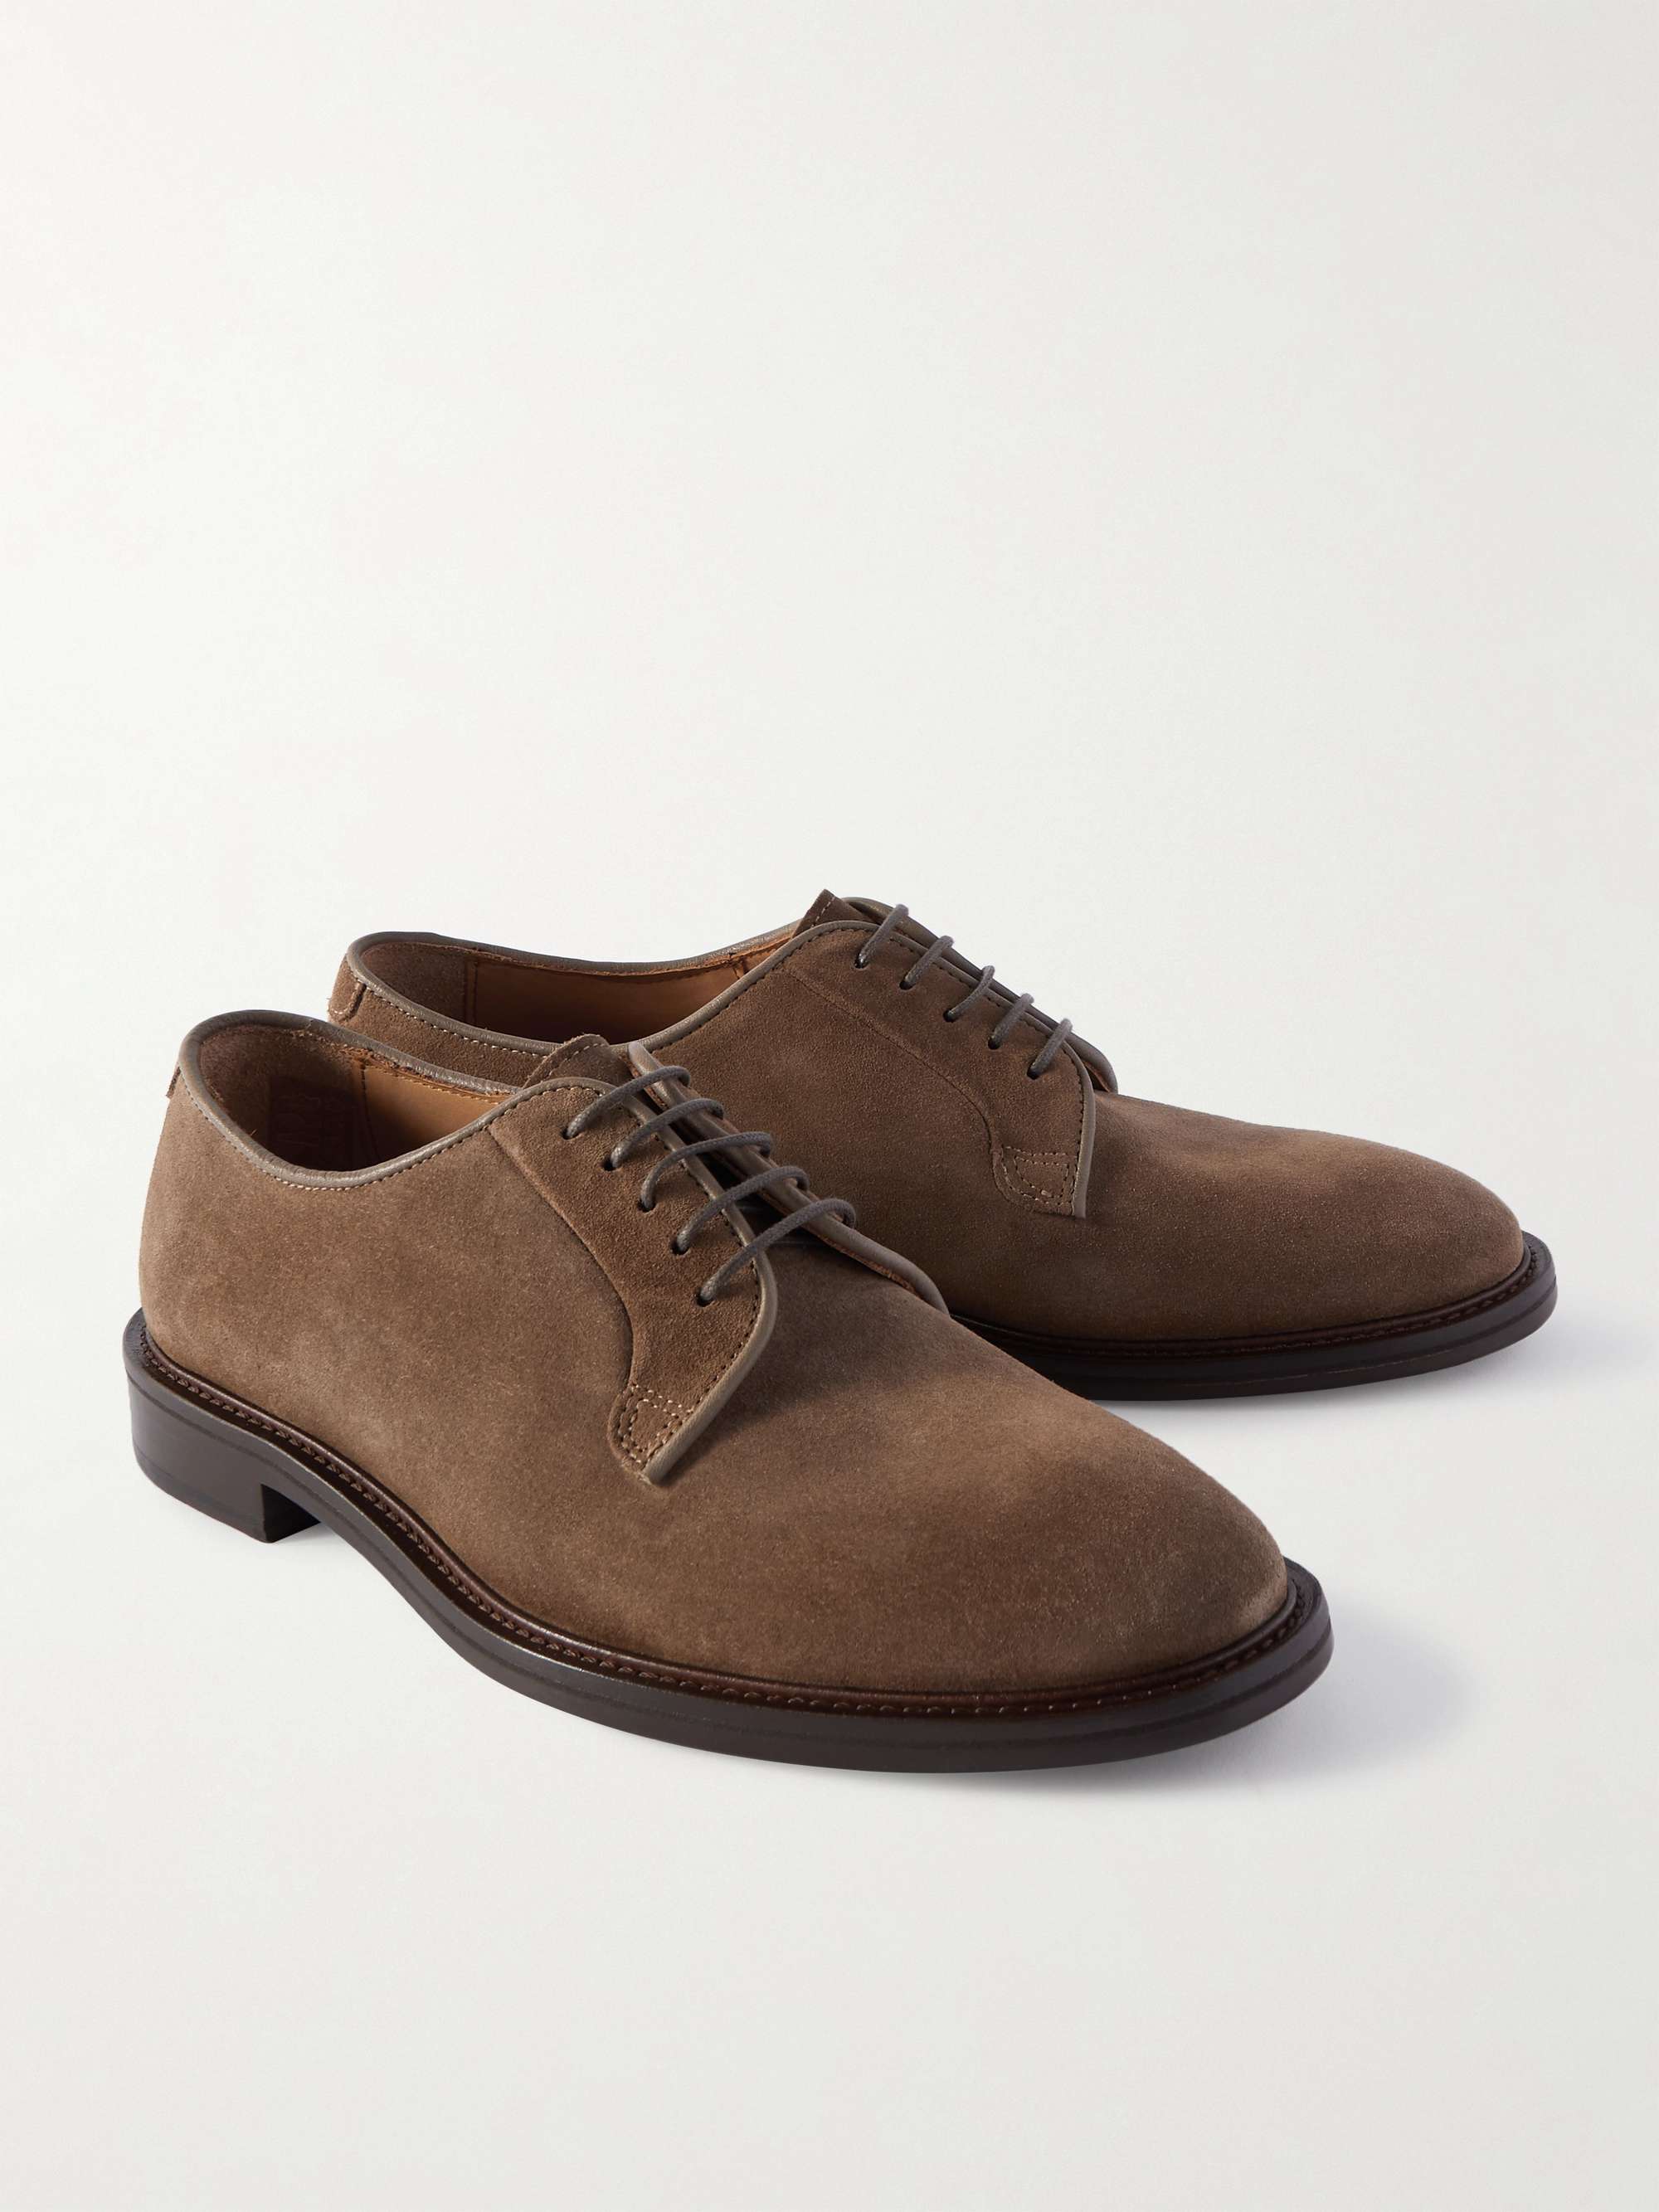 MR P. Lucien Regenerated Suede by evolo® Derby Shoes